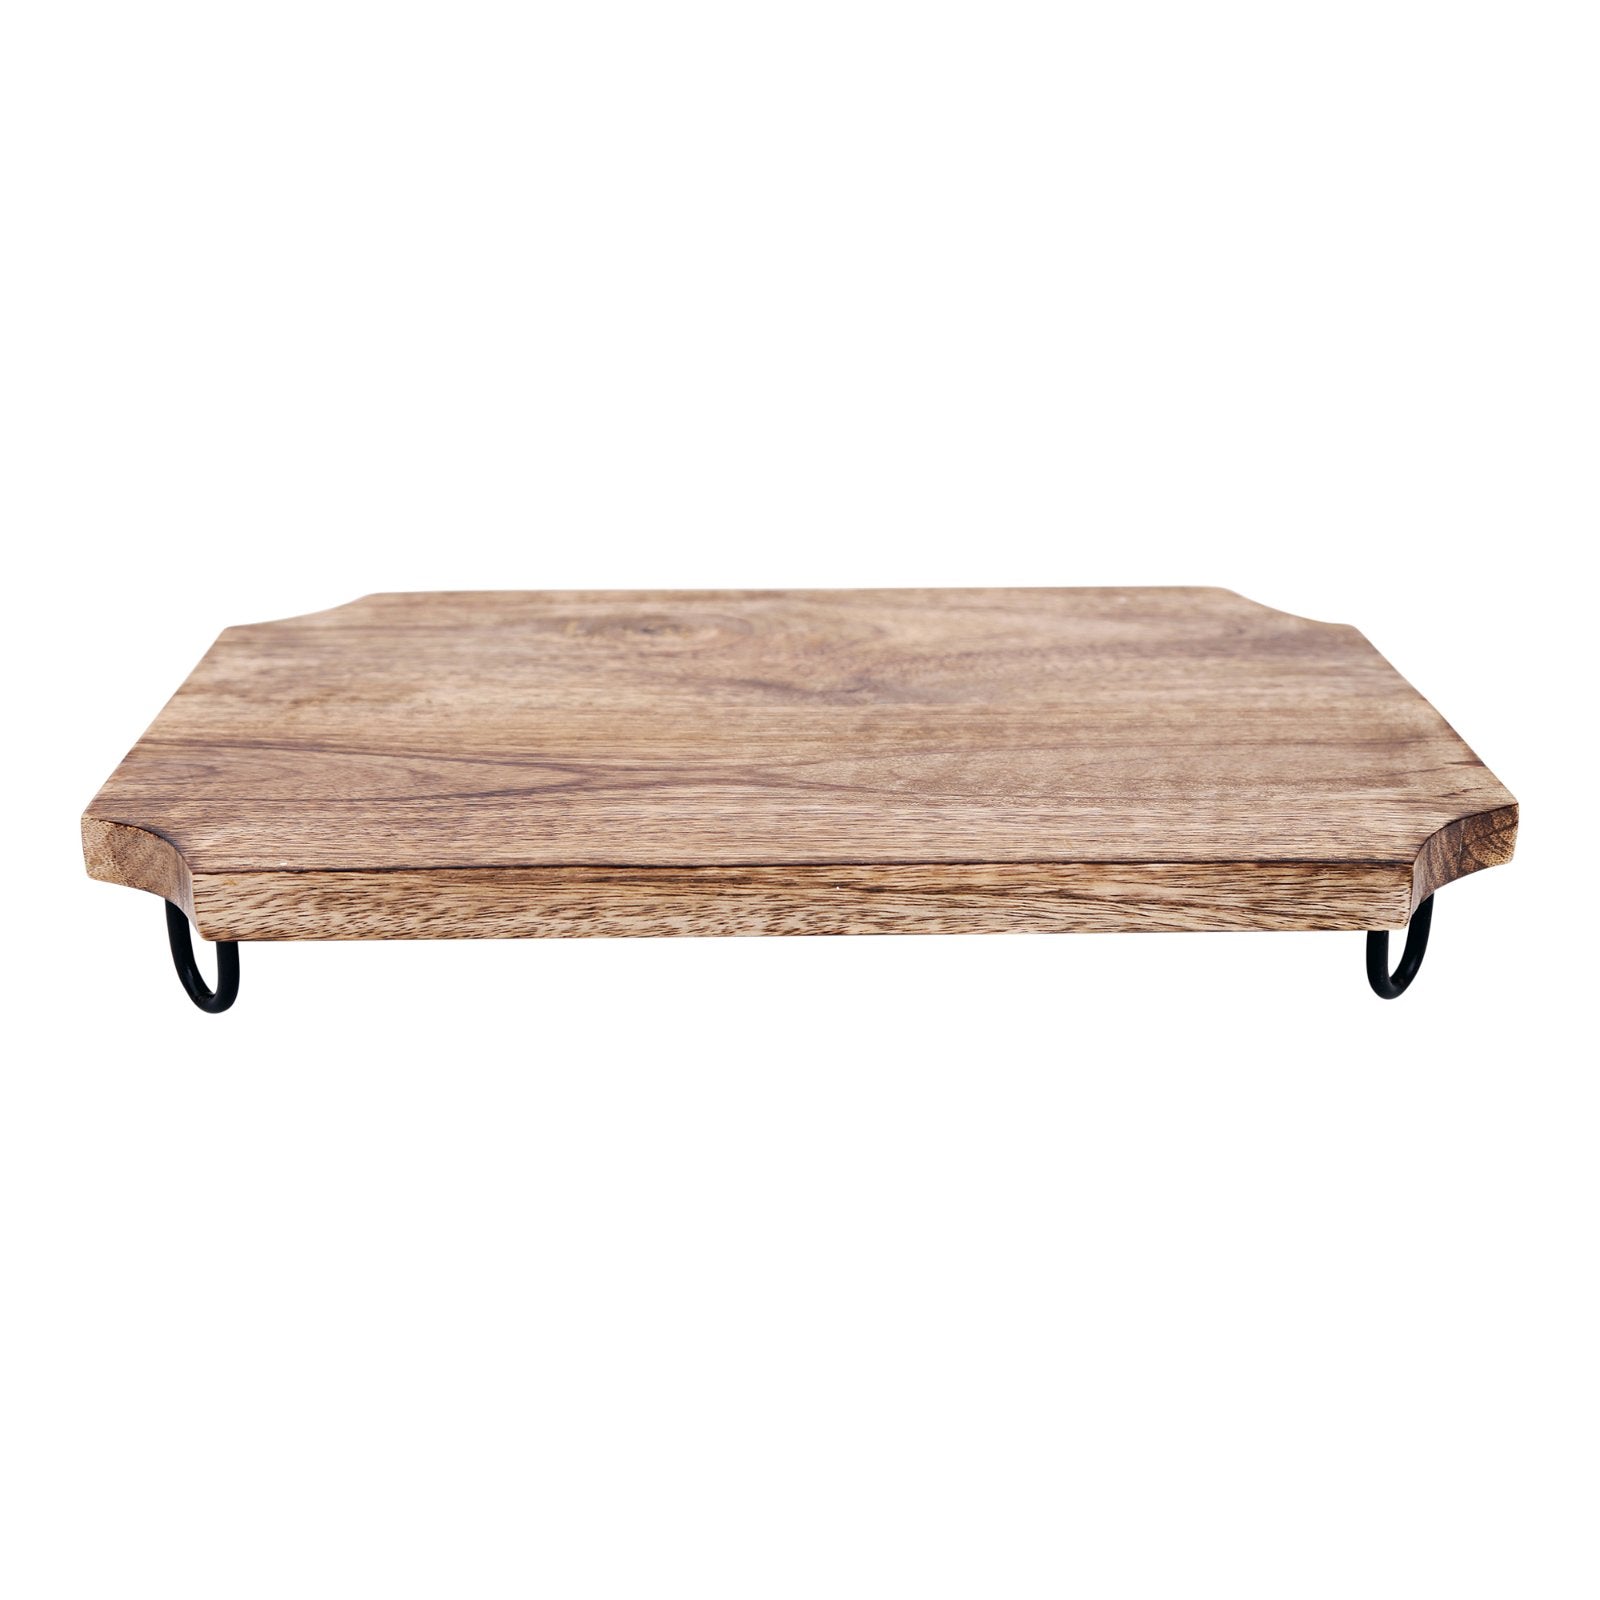 Wooden Distressed Chopping Board On Legs 39cm Willow and Wine